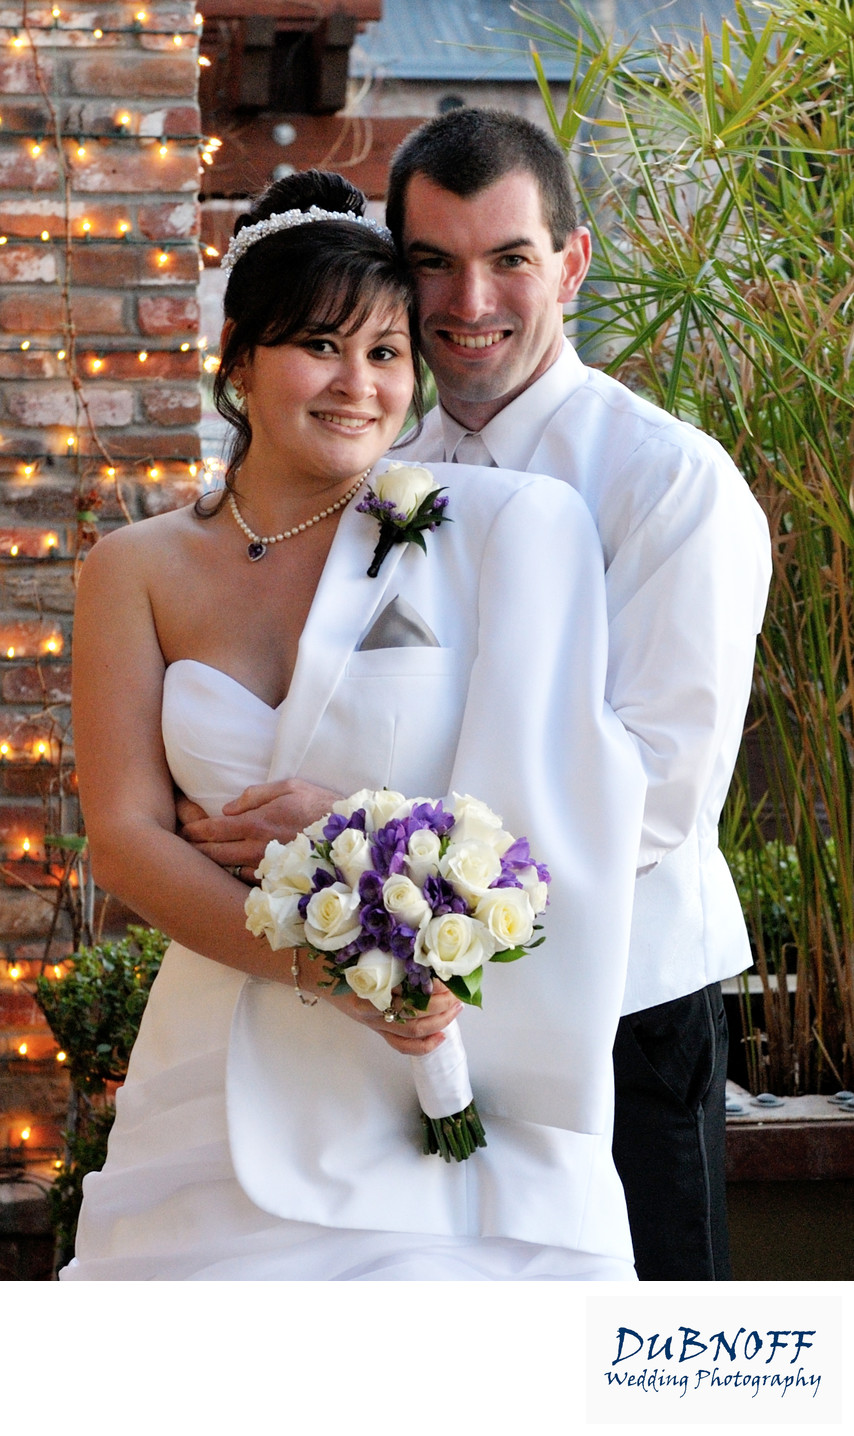 Beautiful Bride with Groom in Livermore Valley Wine  Country Wedding